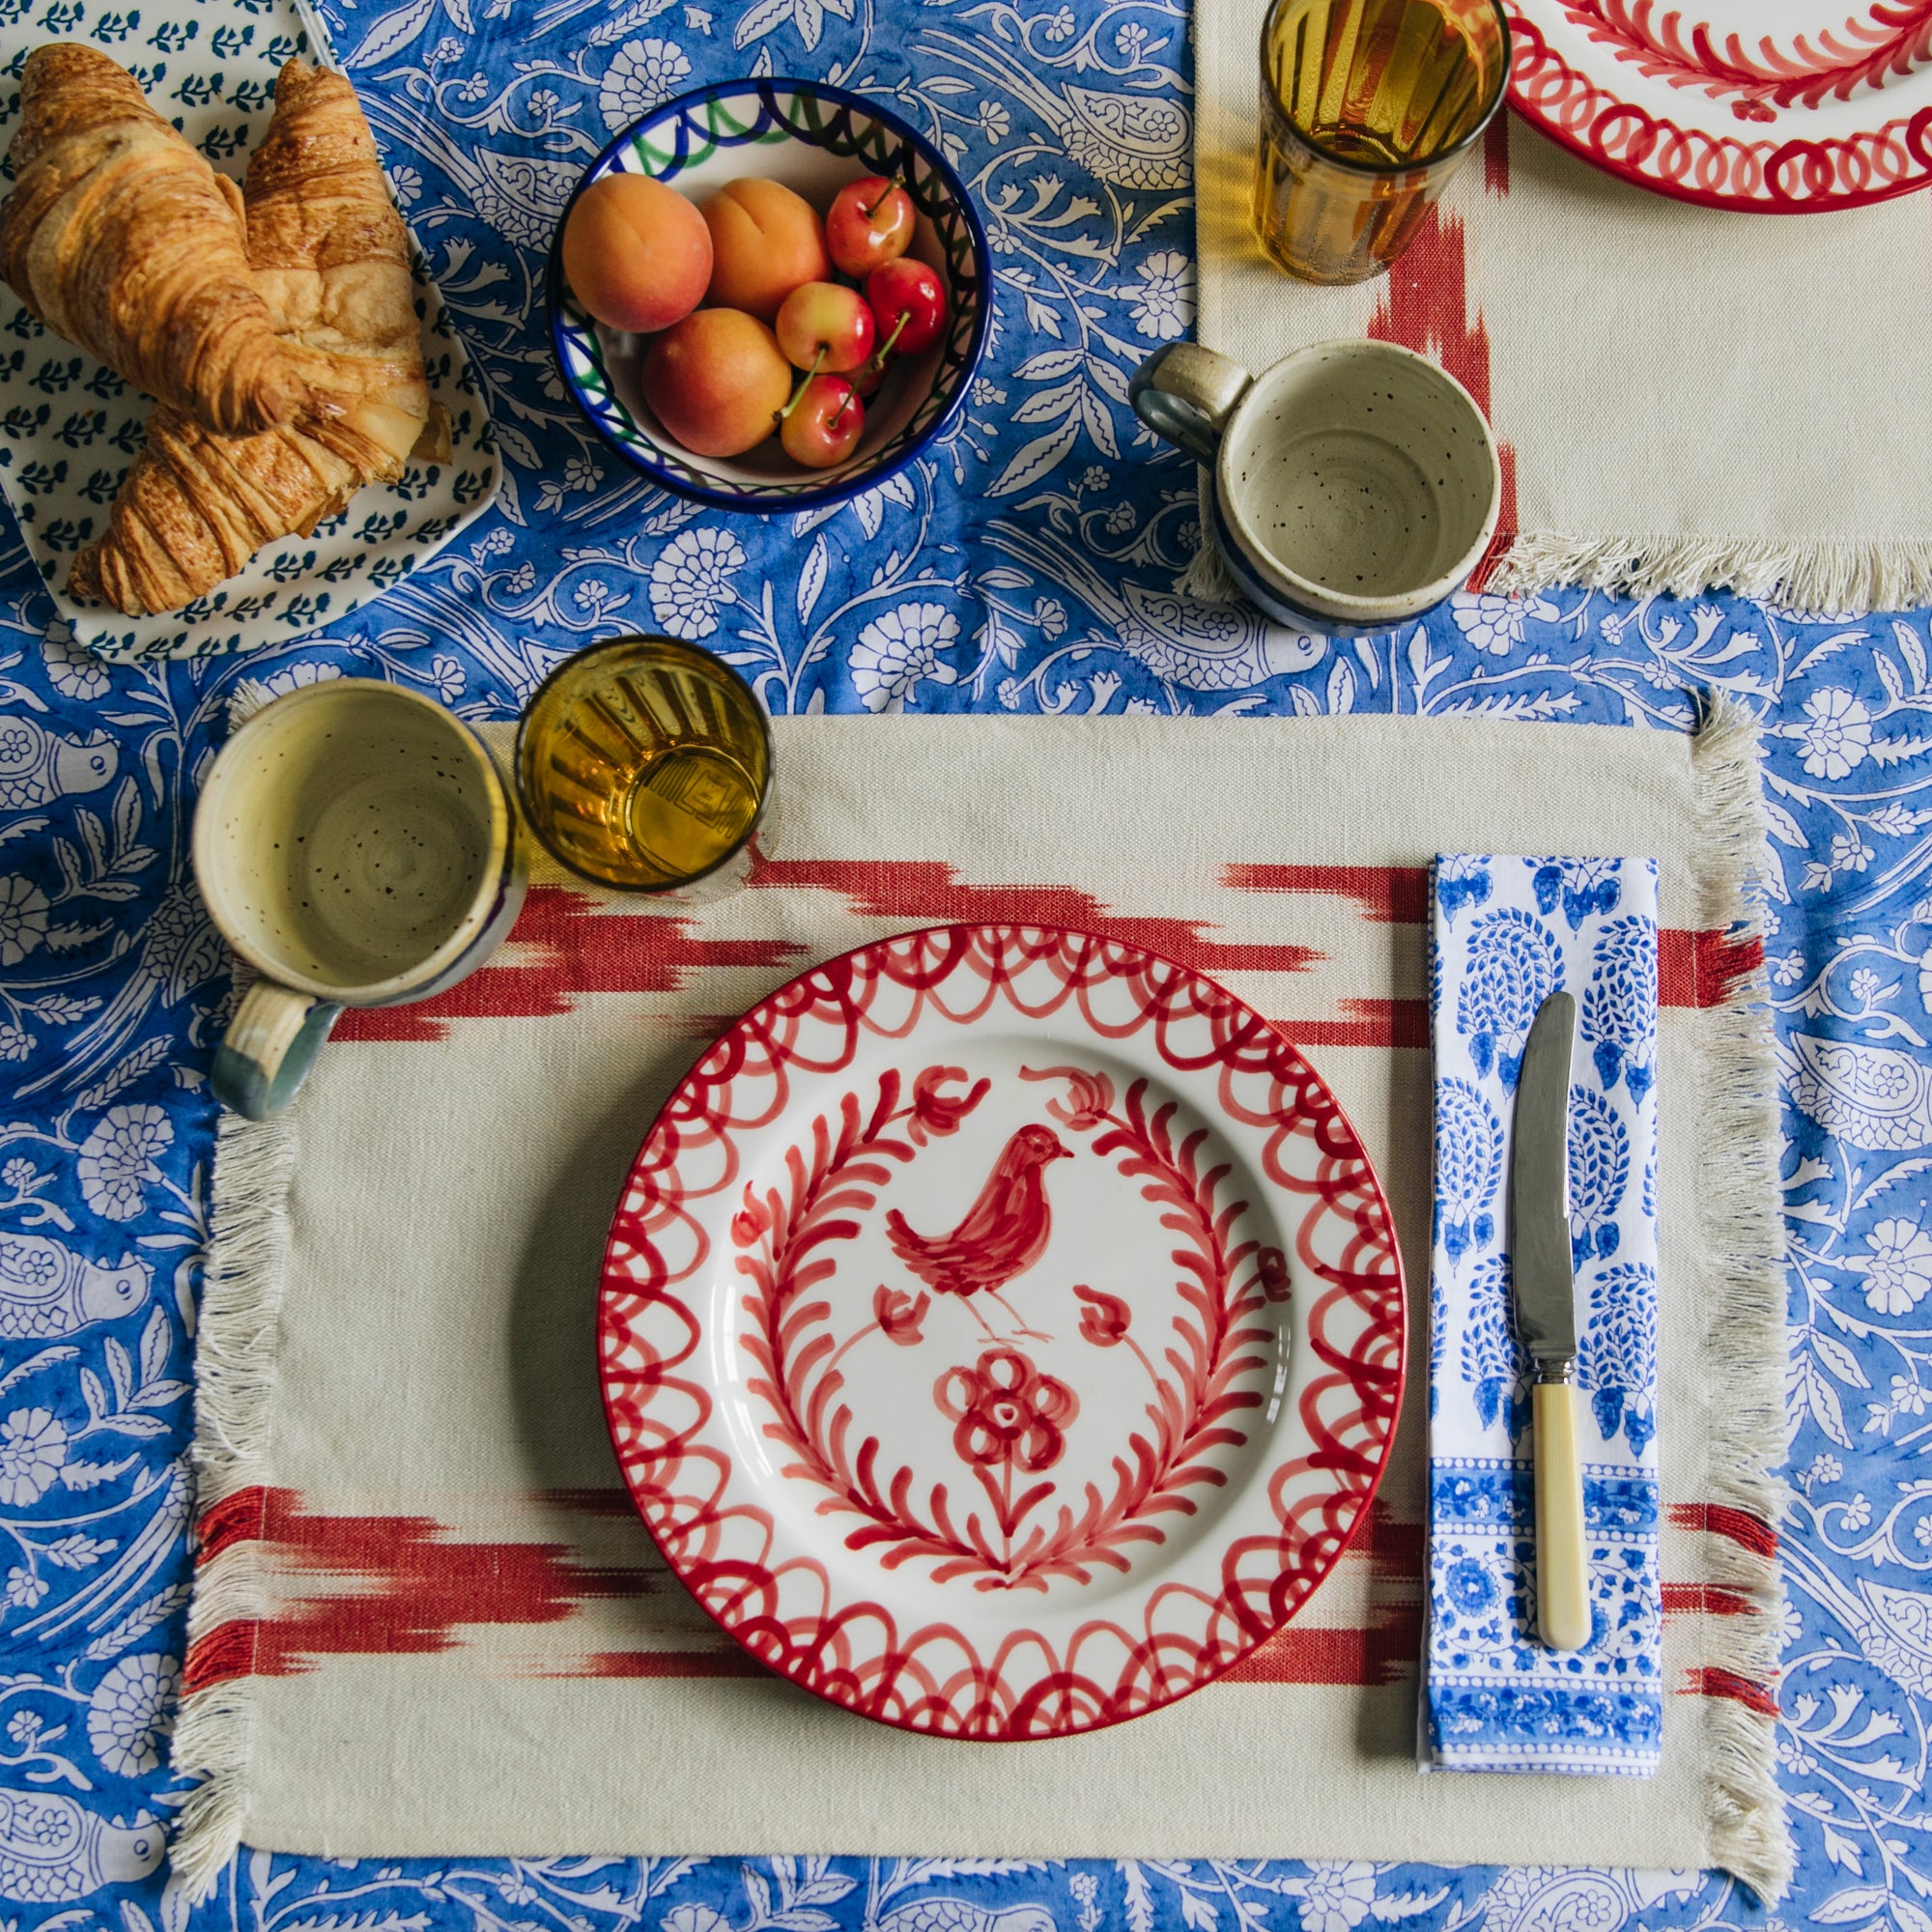 FABRIC PLACEMAT - CREAM WITH TERRACOTTA IKAT CHEVRON